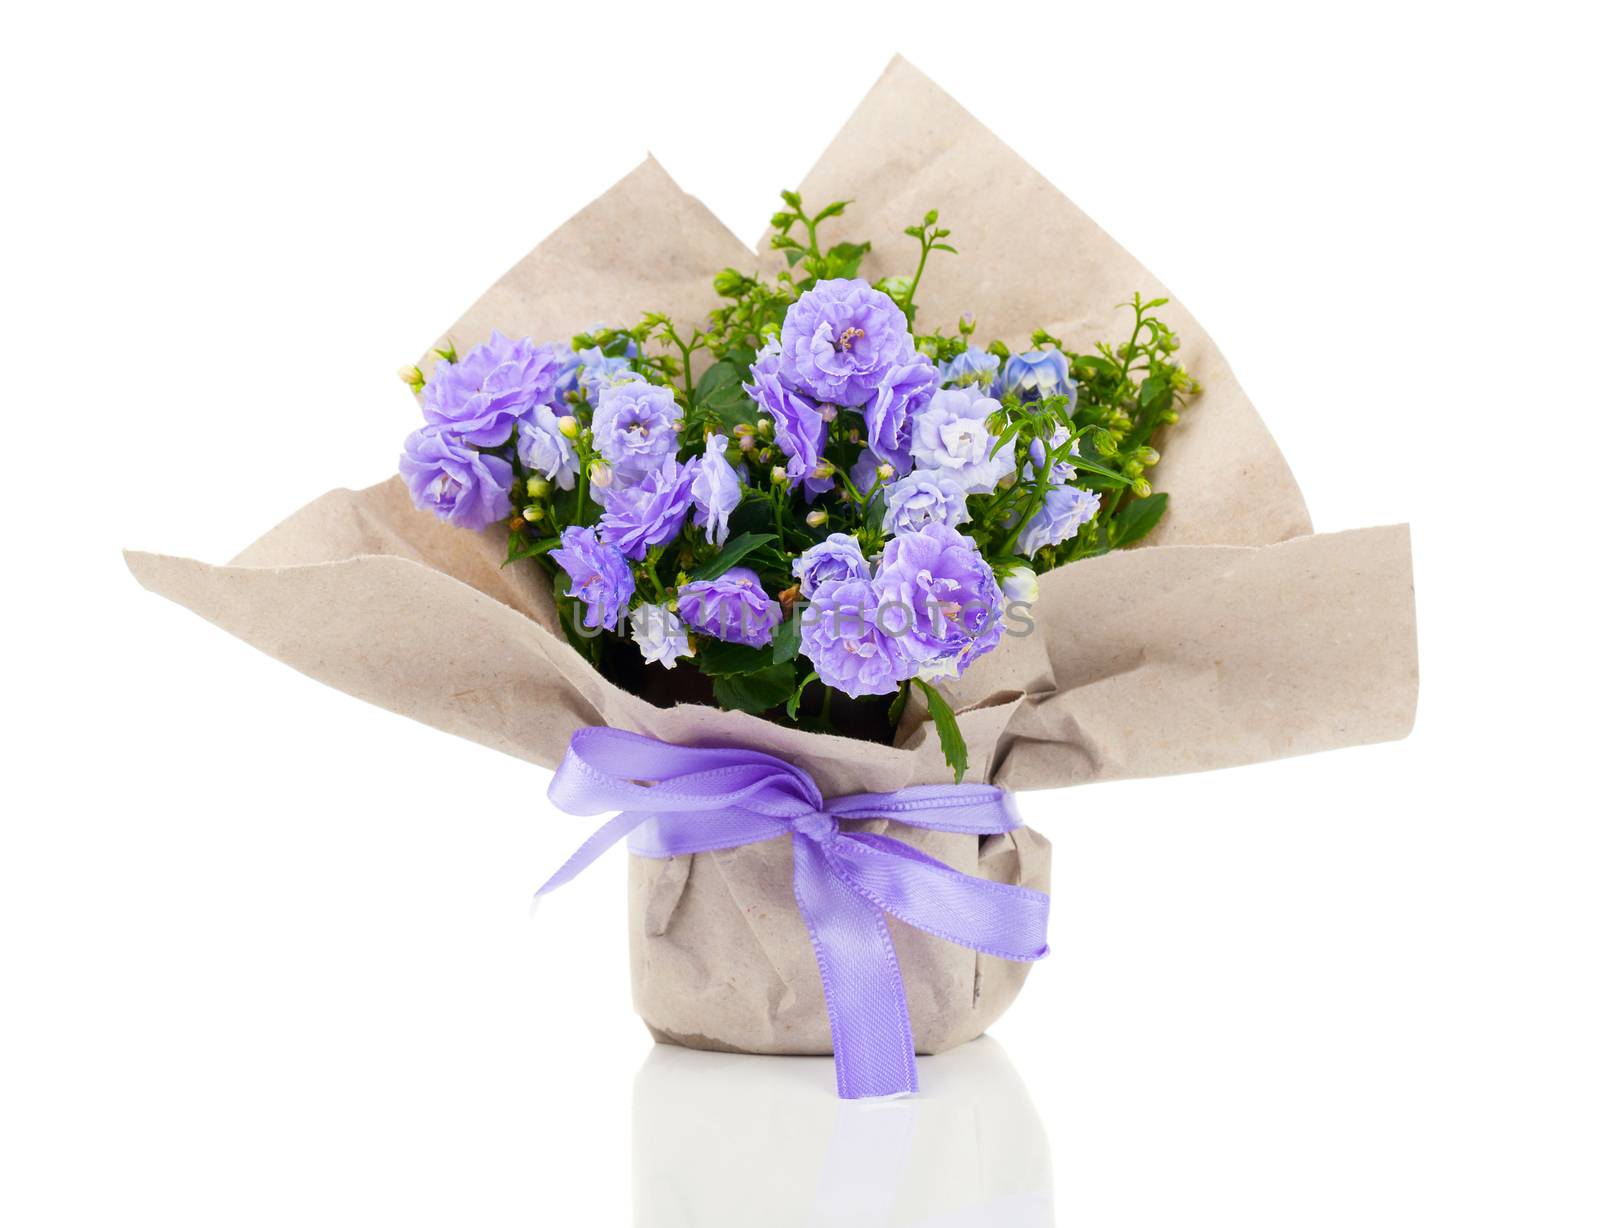 Campanula terry with blue flowers in paper packaging, isolated o by motorolka